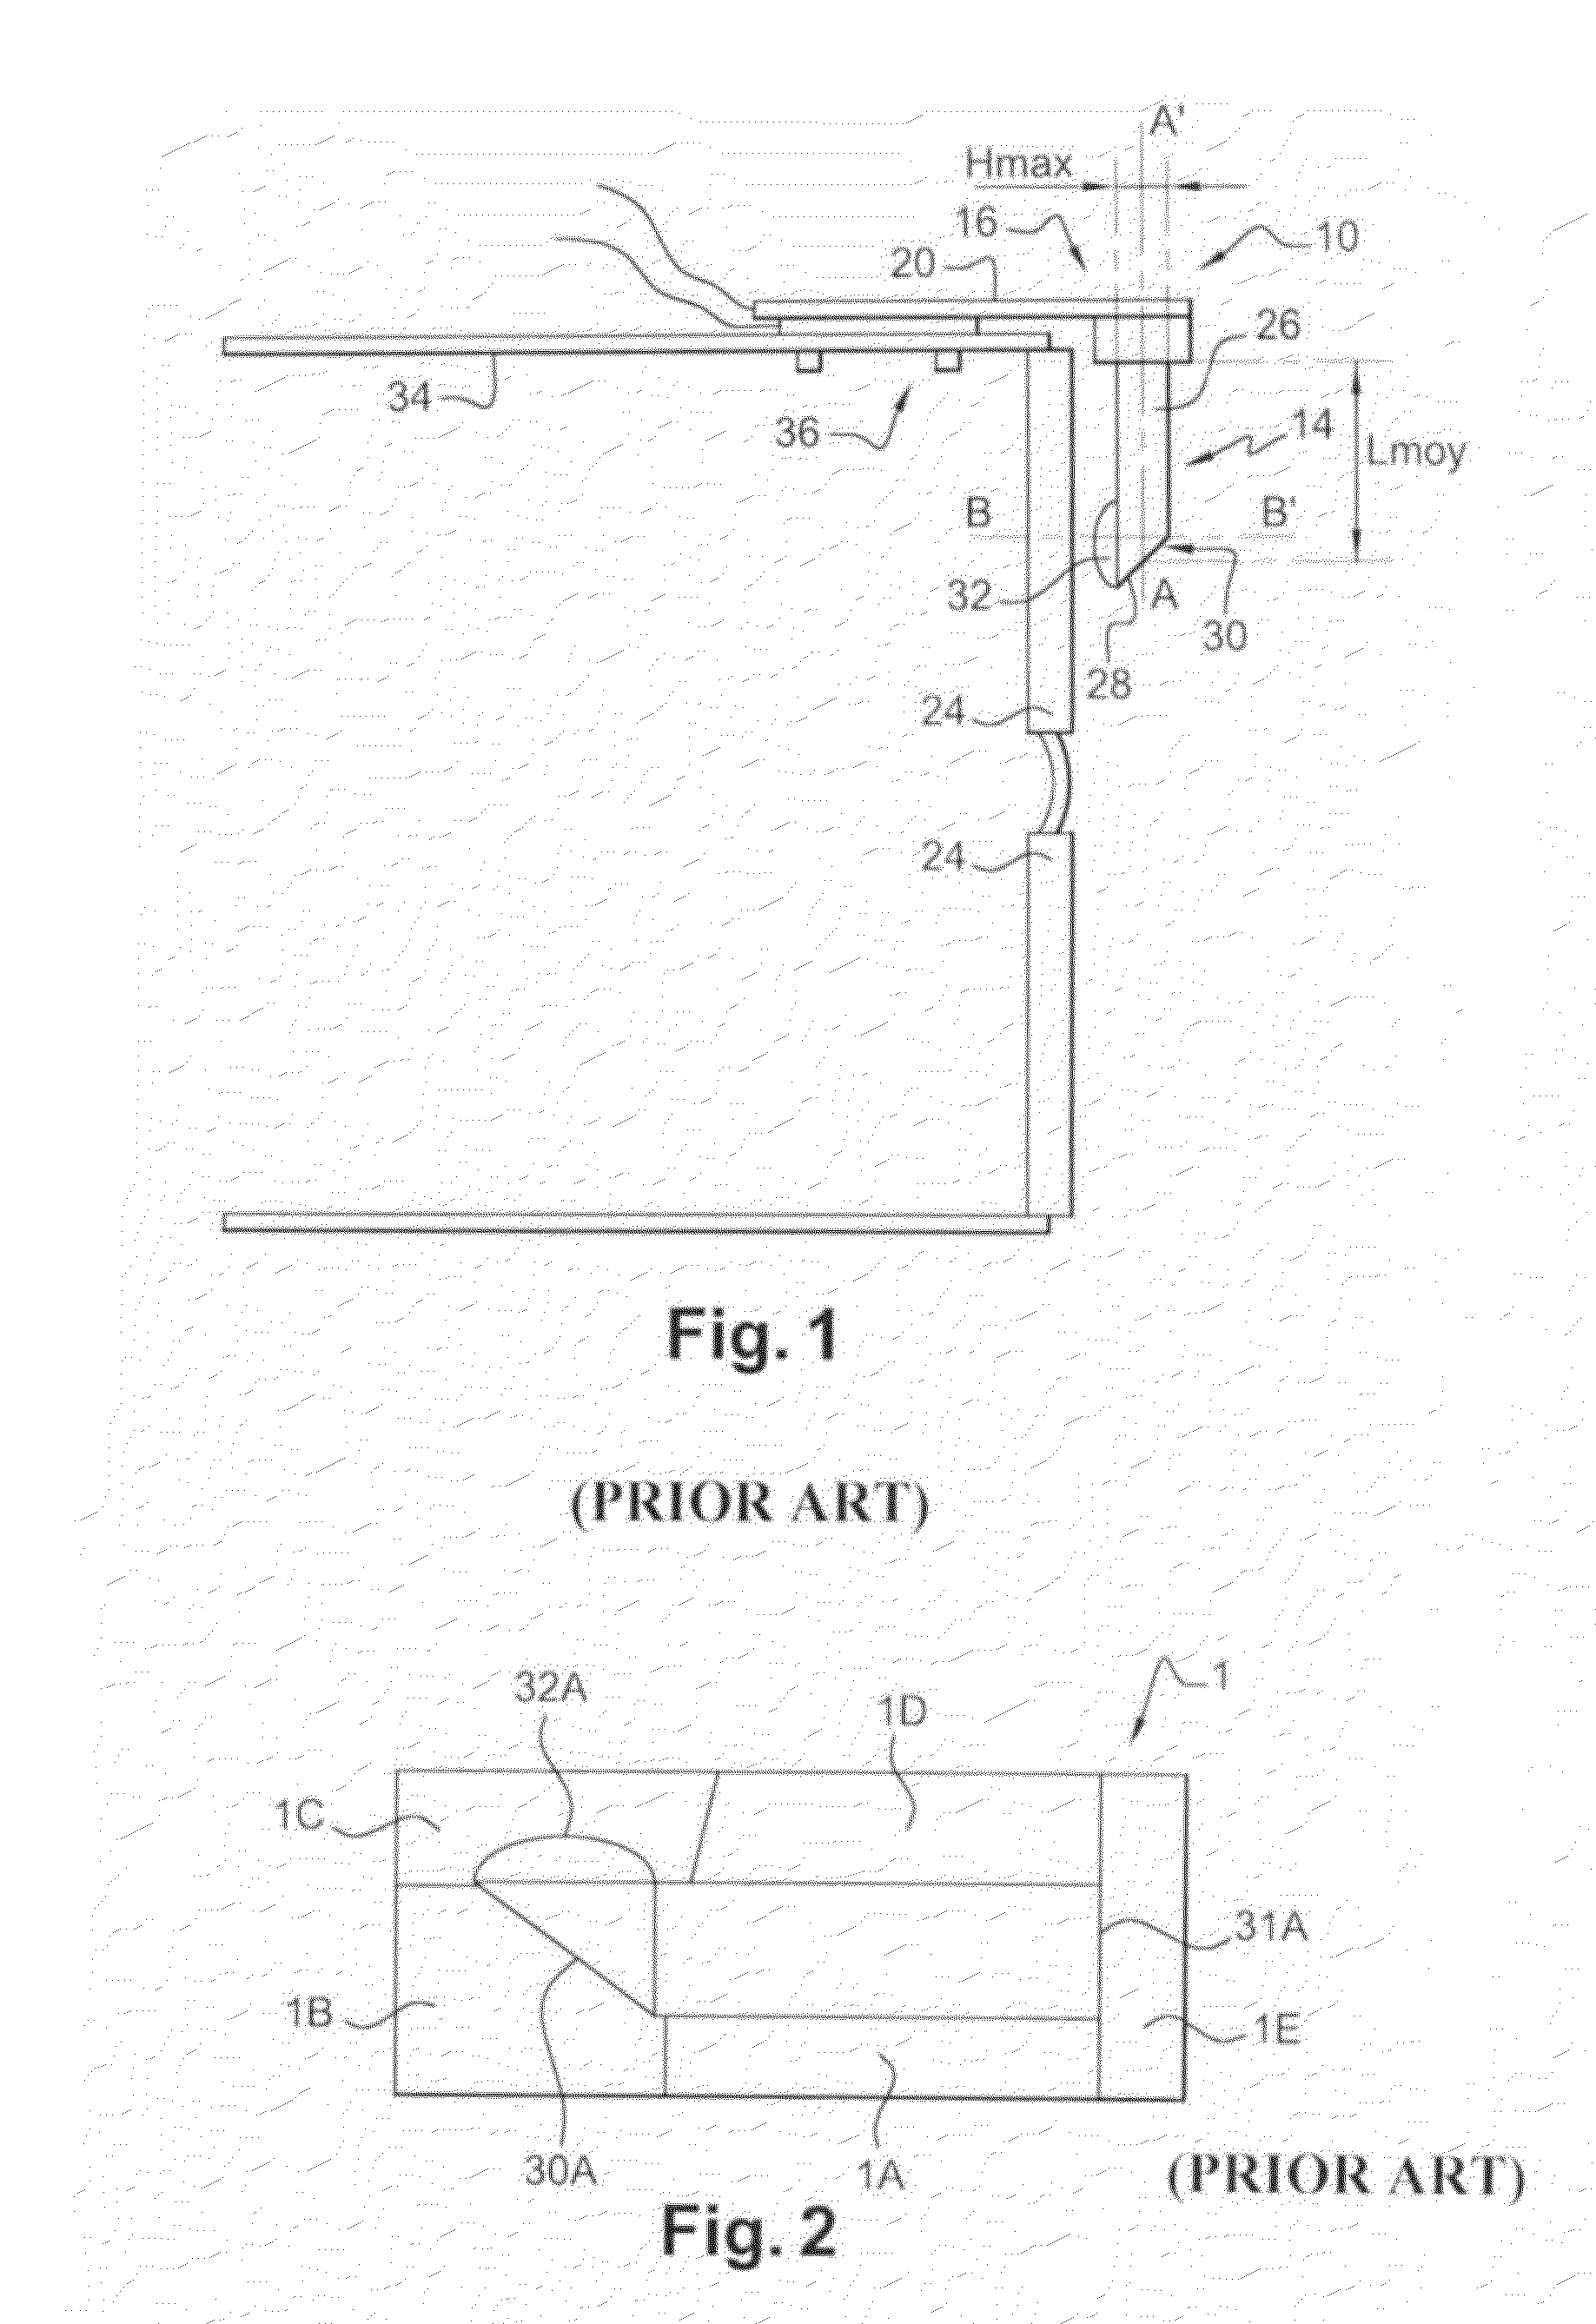 Method of fabricating a light duct of thermoplastic material